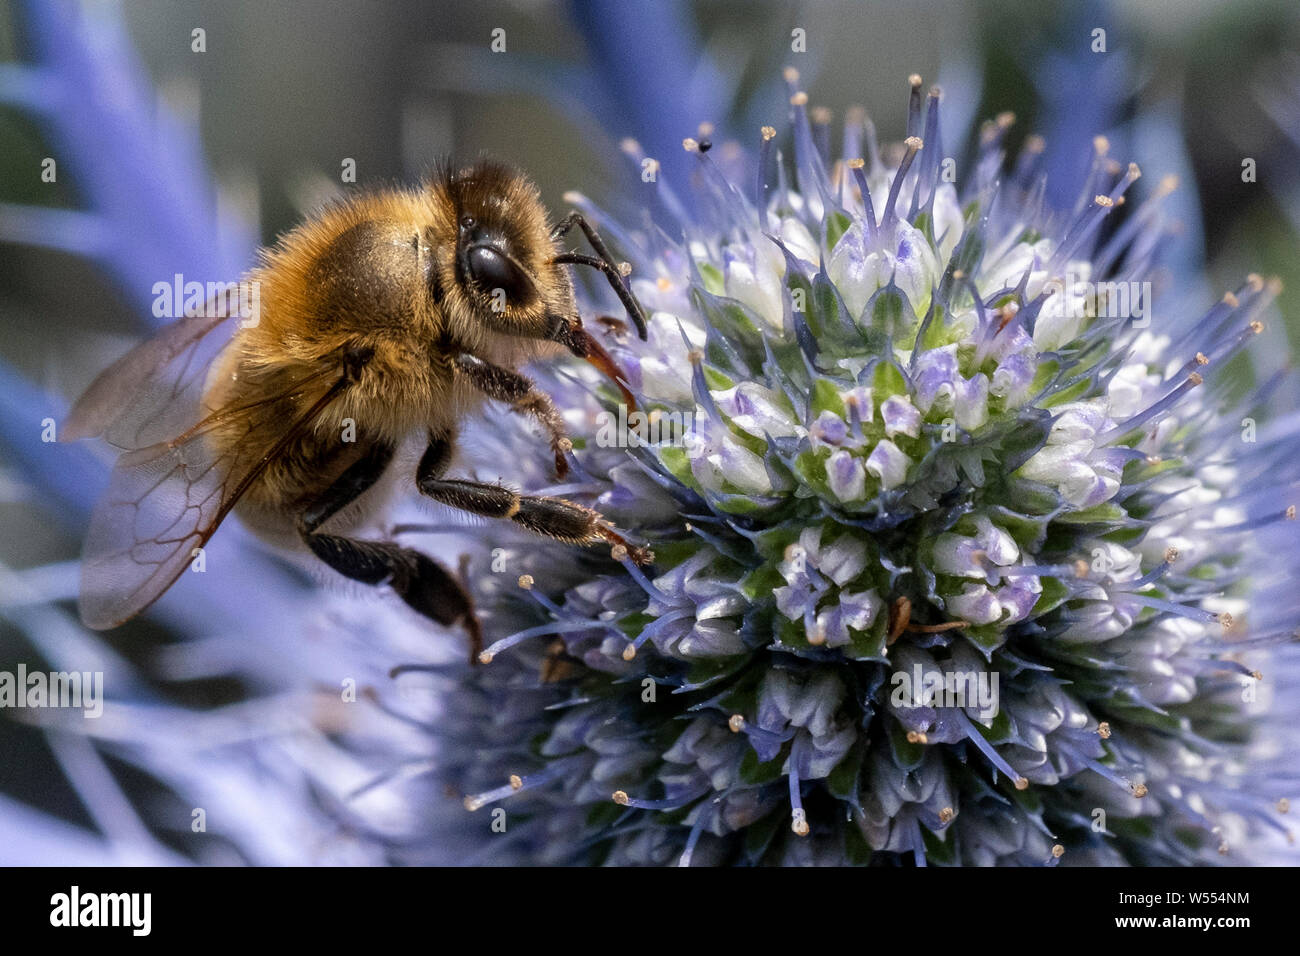 Bee prospecting for pollen in the flower head of a sea holly plant, scientific name is Eryngium Stock Photo